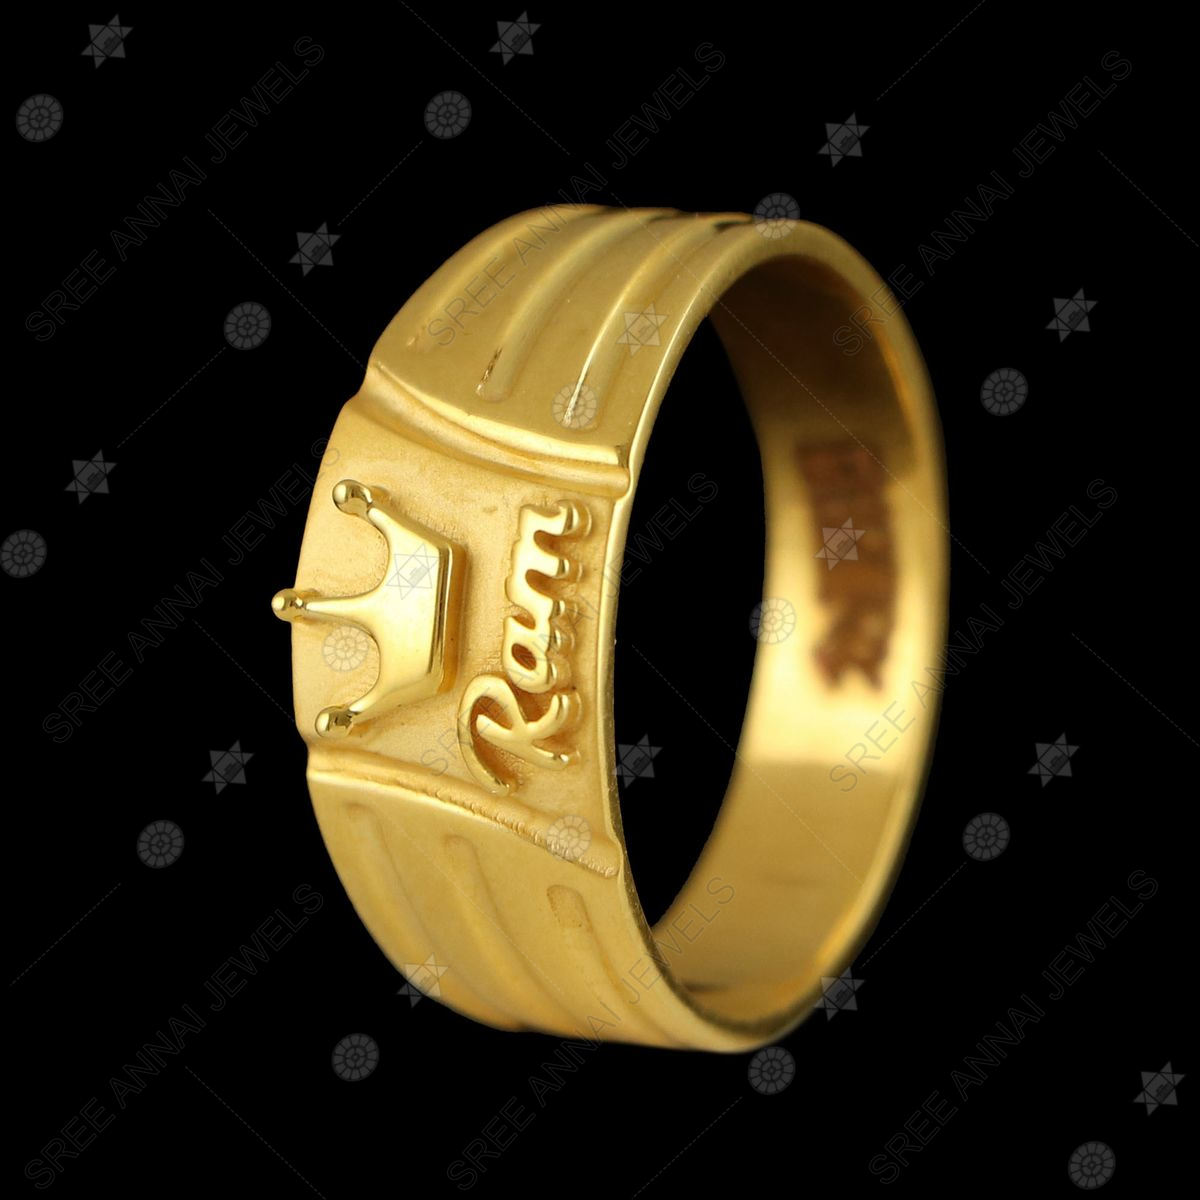 Buy quality 22 Kt Gold Casting Ring in Ahmedabad